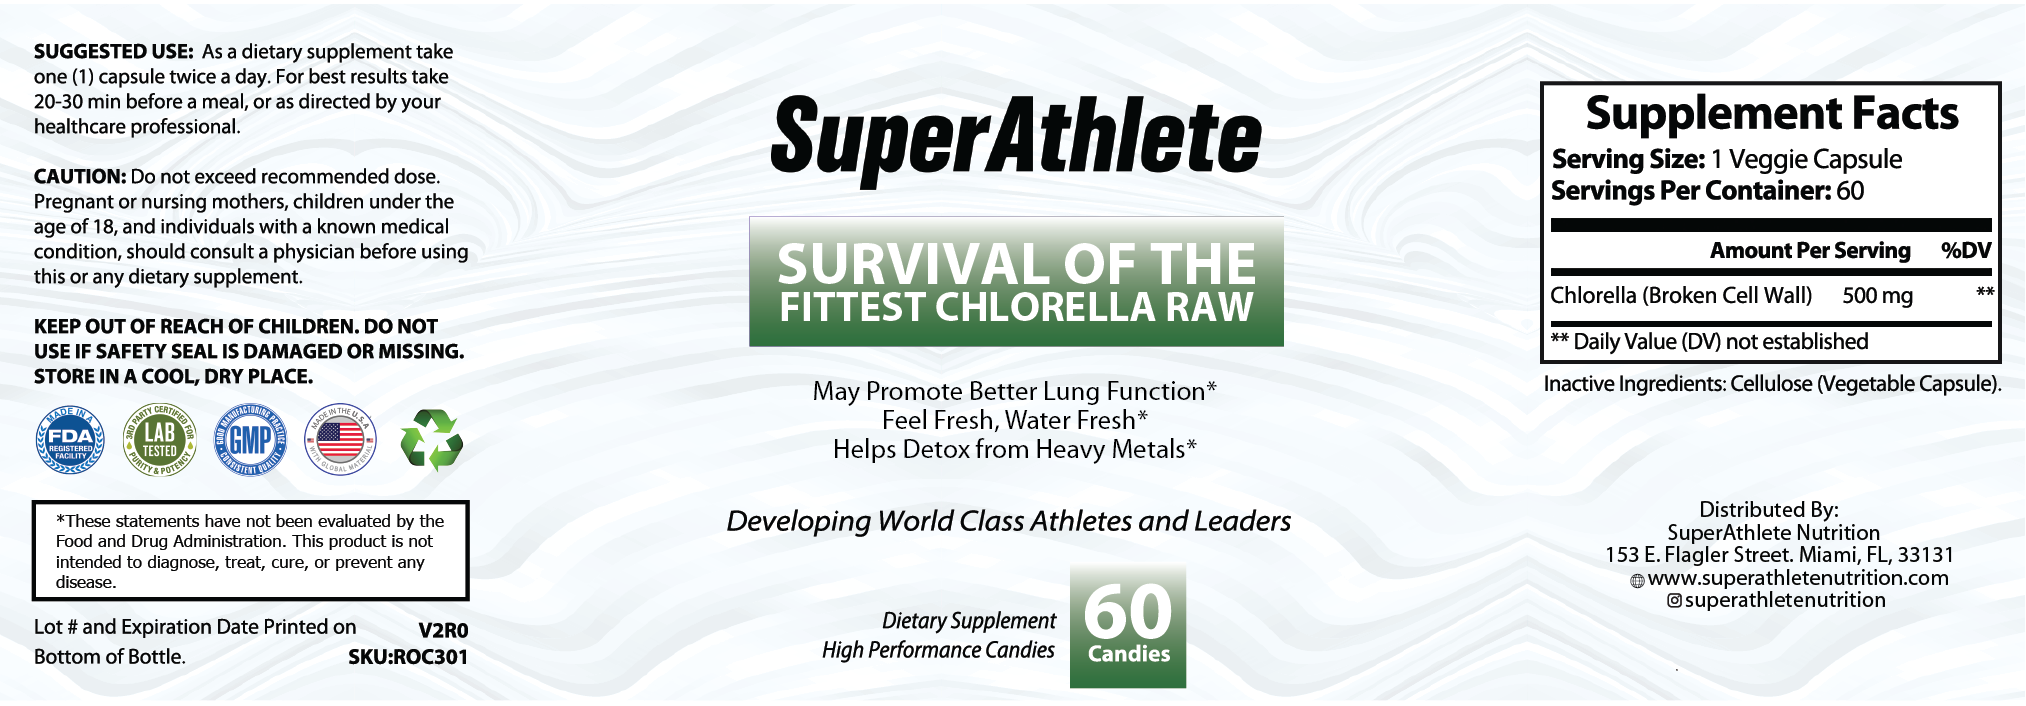 Survival of the Fittest Chlorella Raw